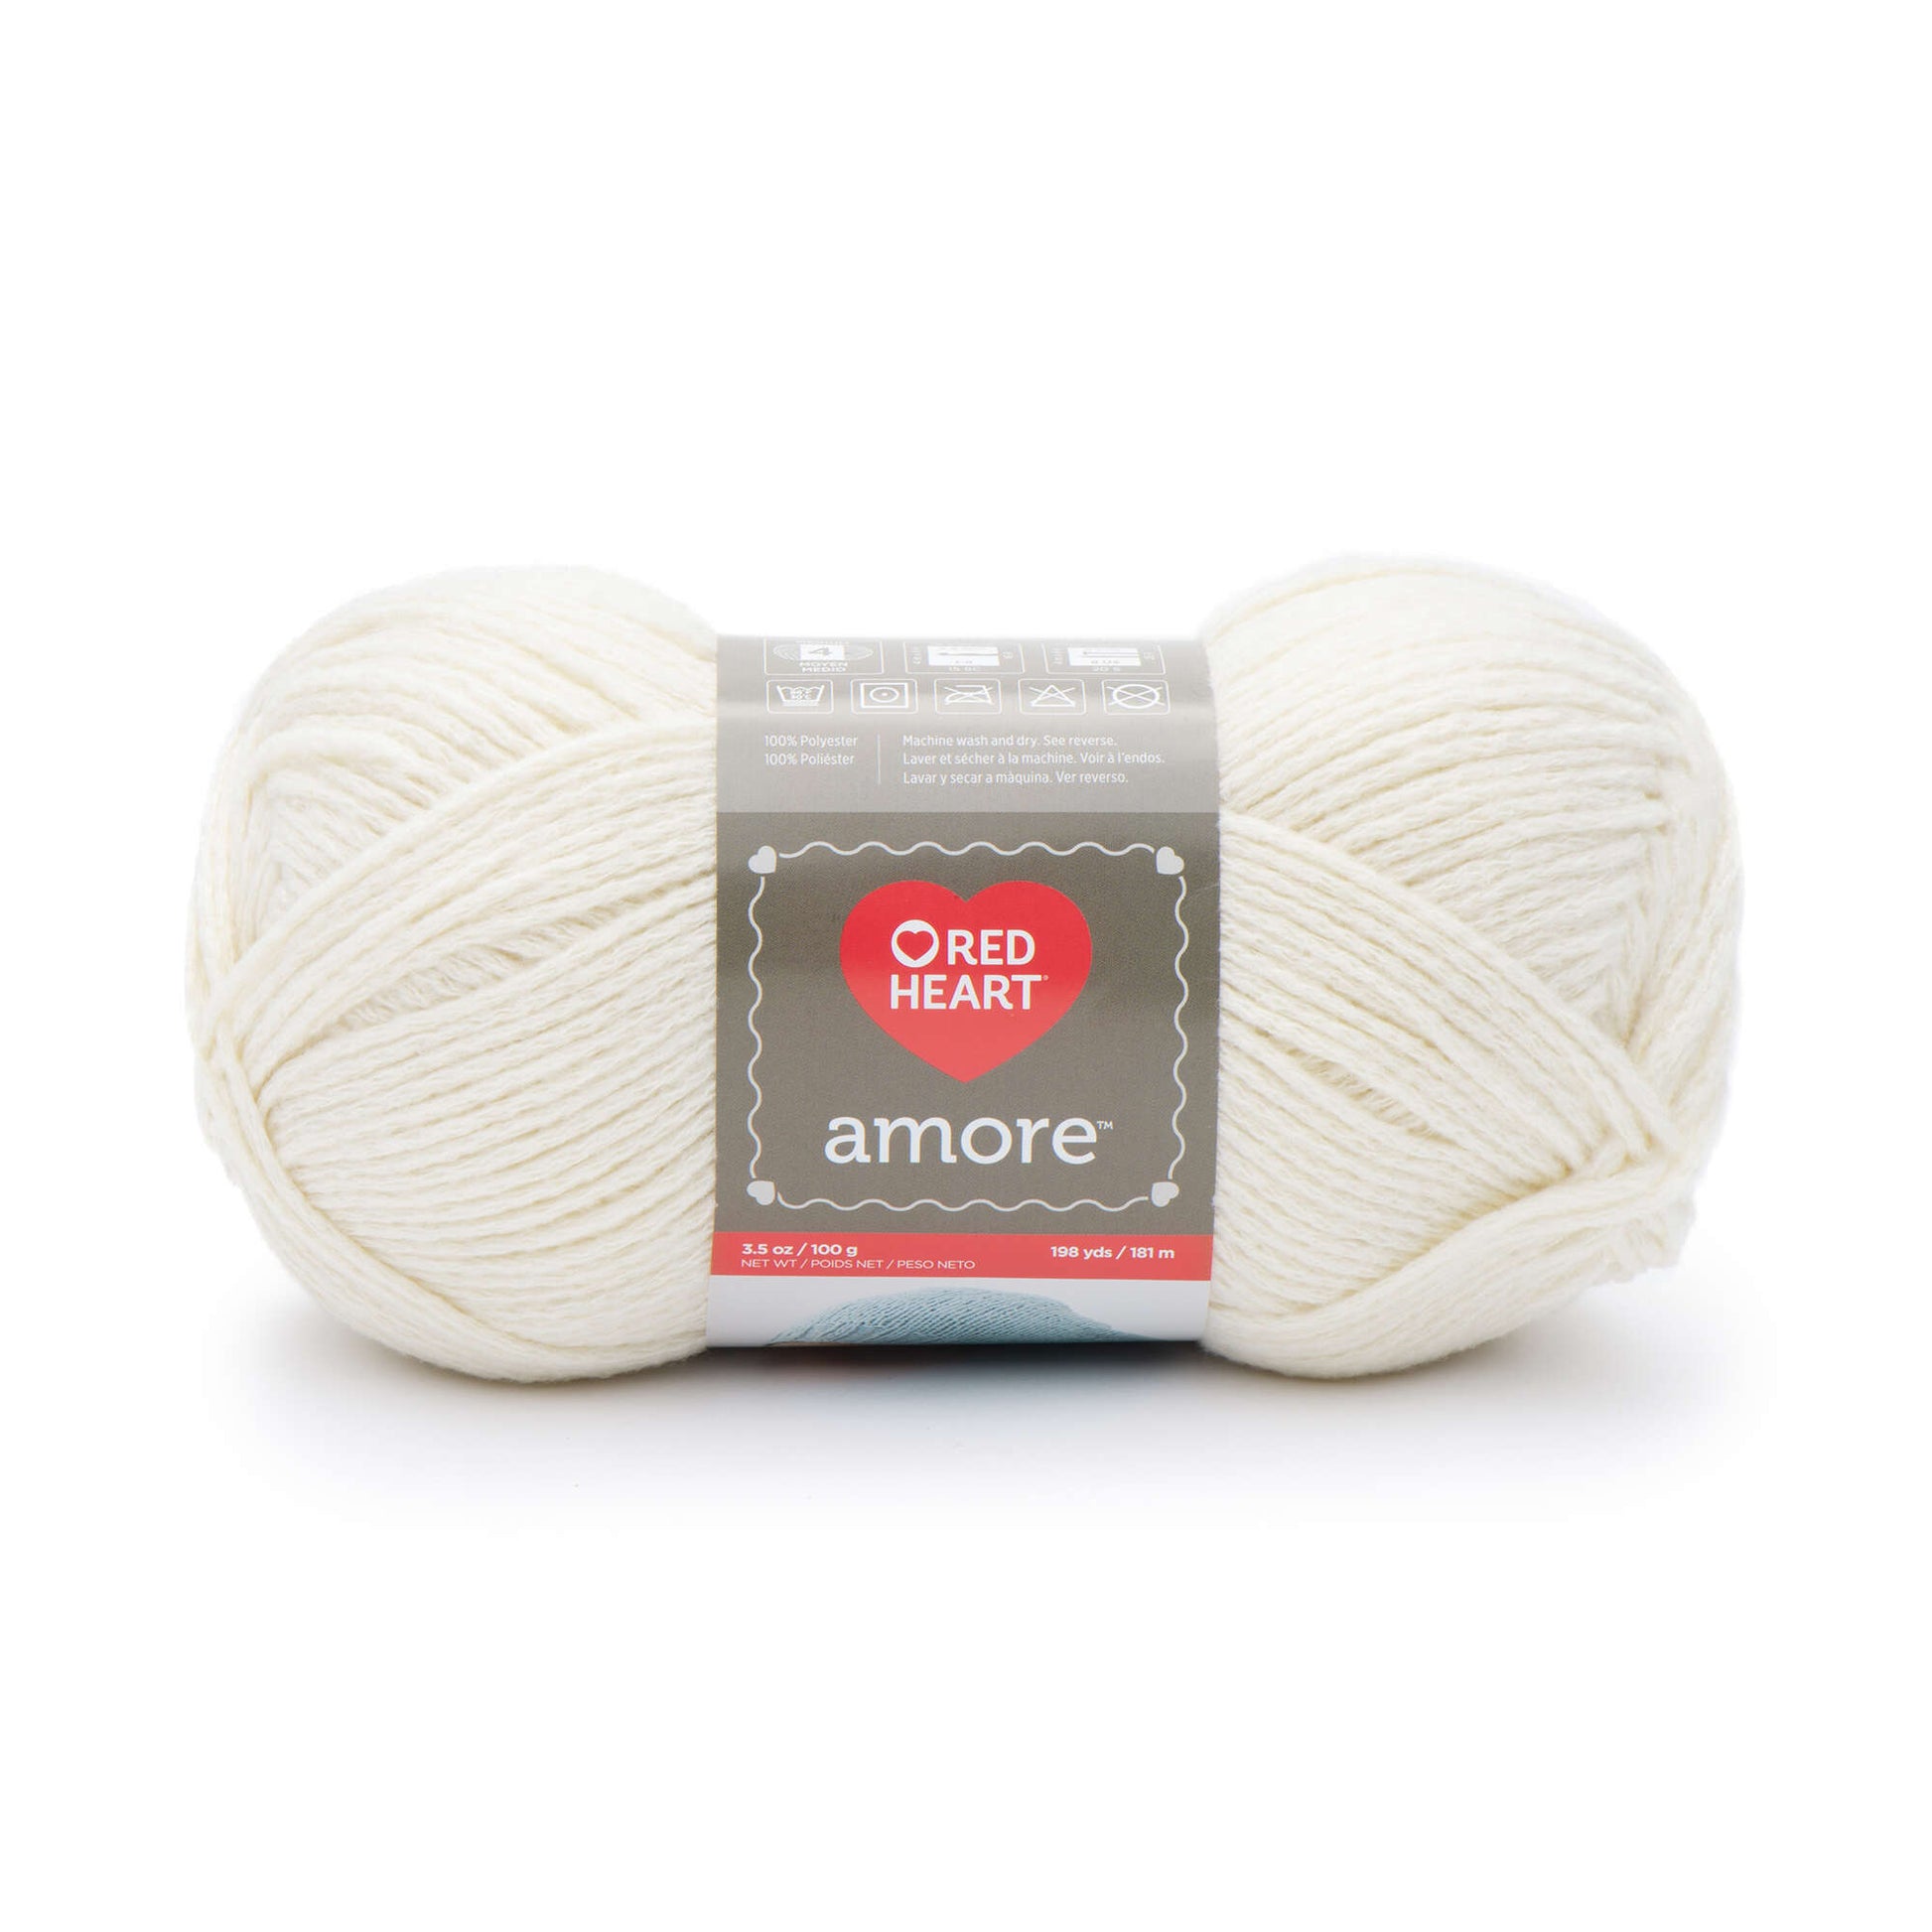 Red Heart Amore Yarn - Discontinued shades Chamomile